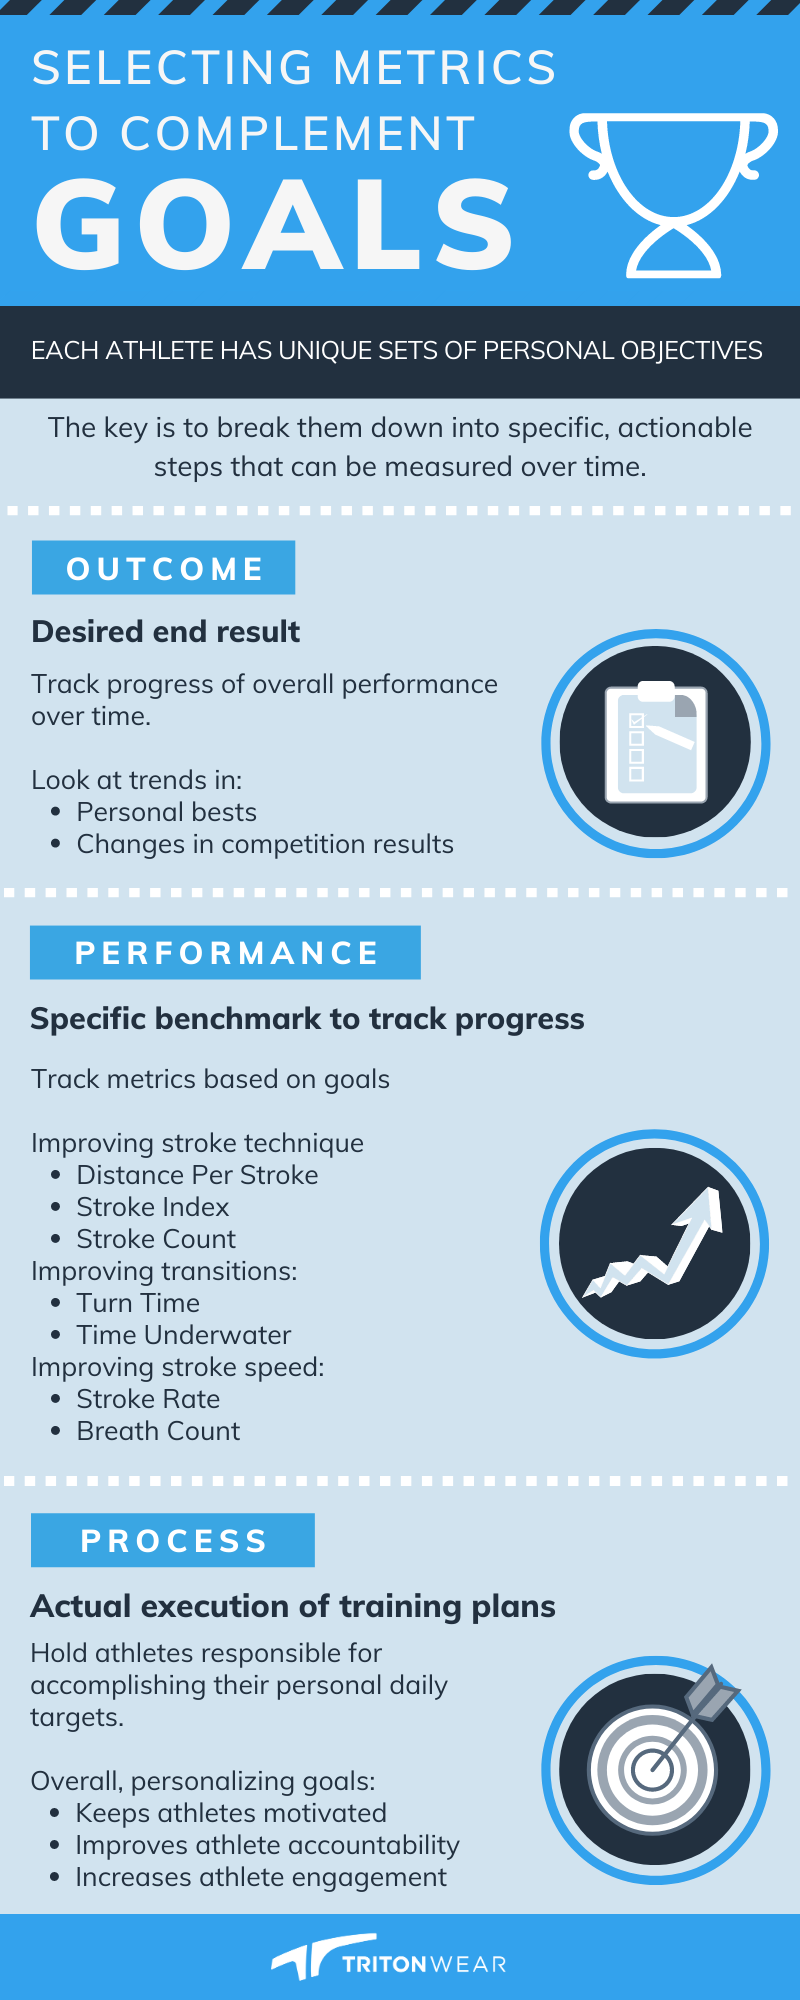 Selecting Metrics to Complement Goals infographic